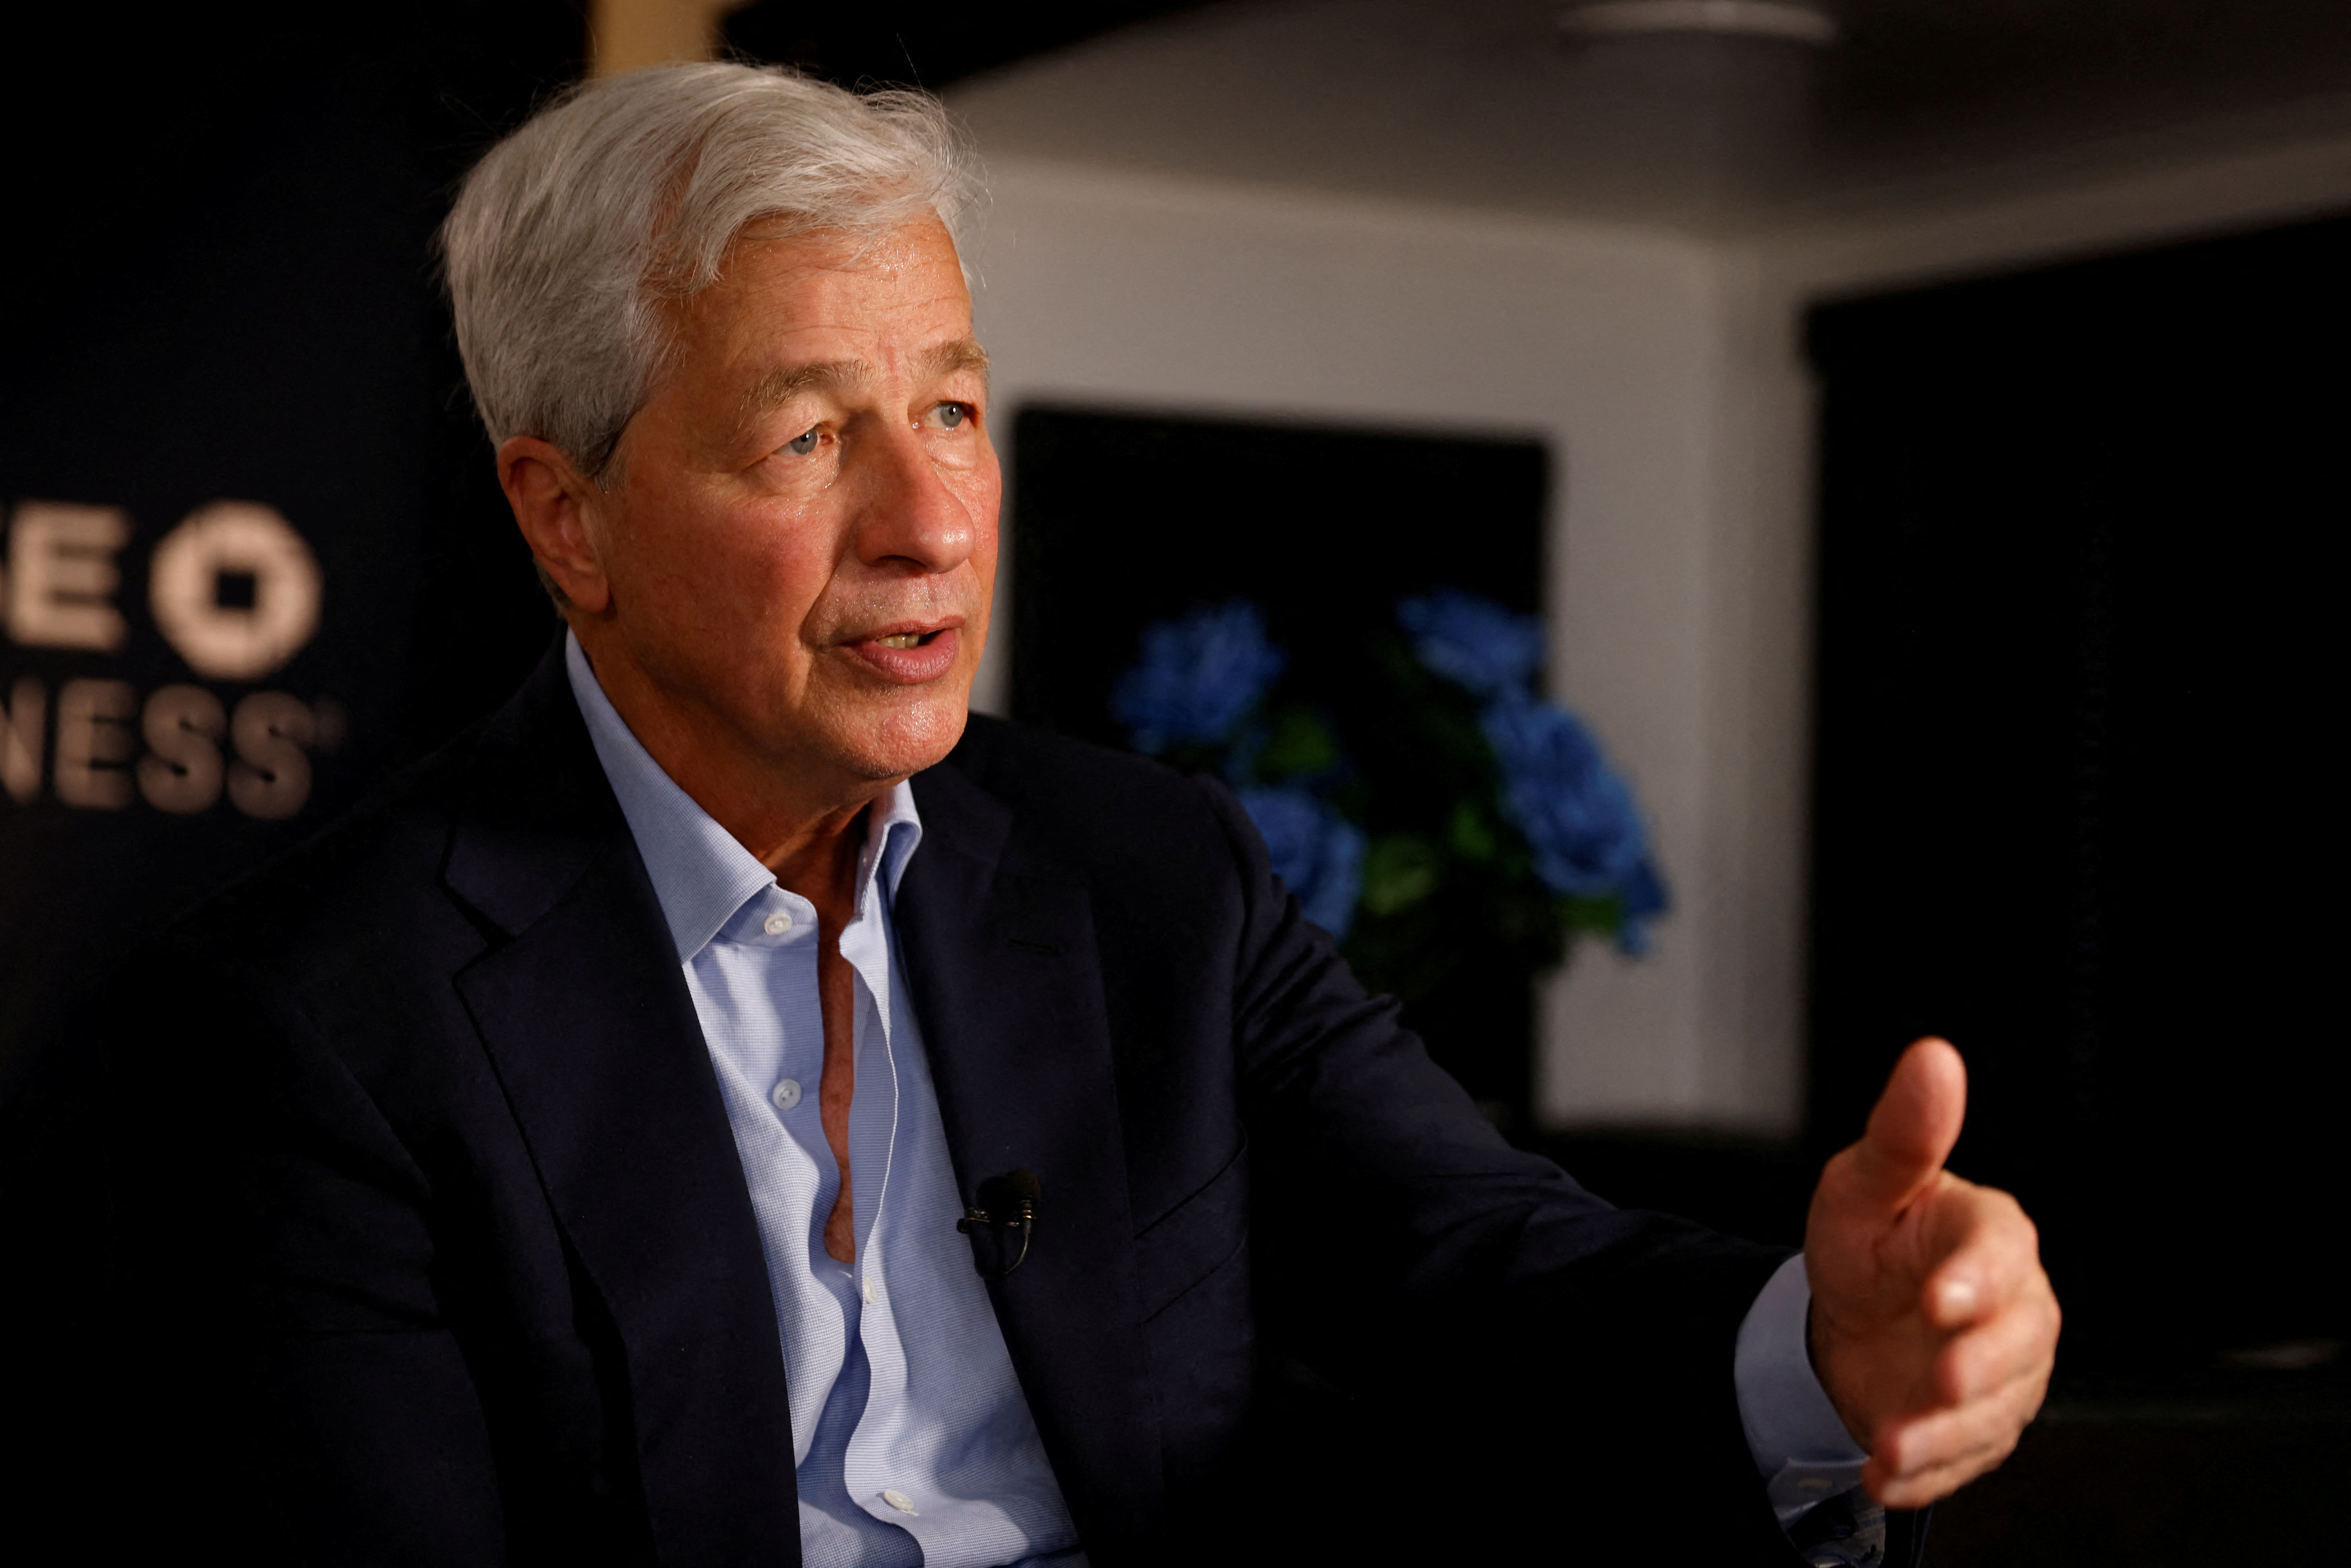 JPMorgan’s Dimon says the US banking crisis is not over, sees long-term consequences